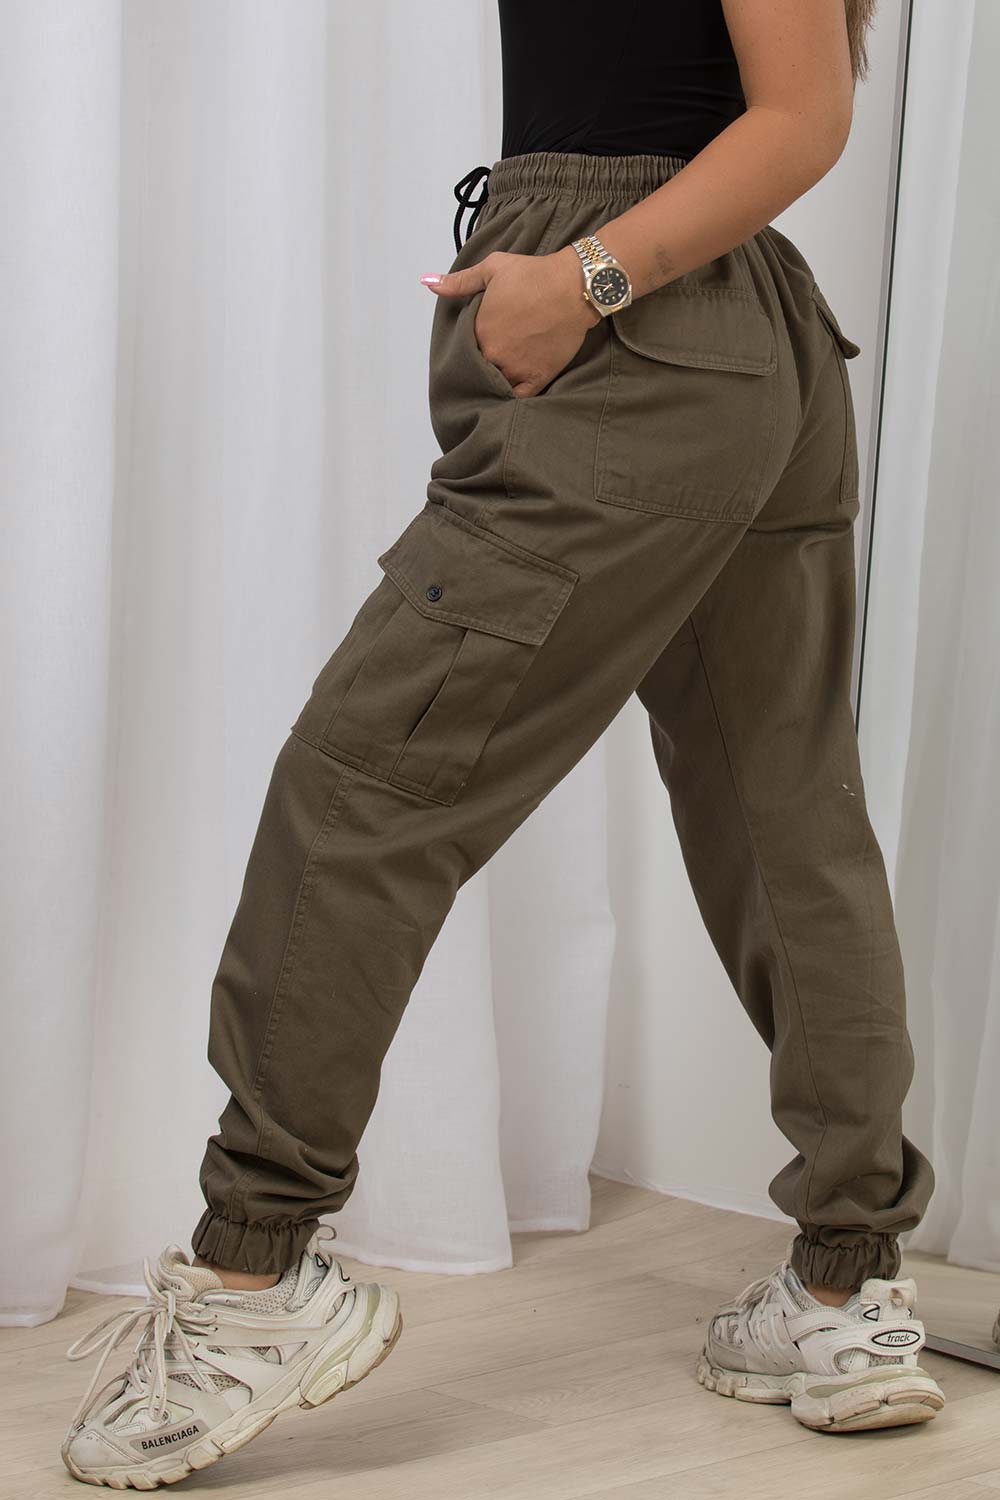 Amazon.com: Men's Casual Pants Men's Cargo Trousers Work Wear Combat Safety  Cargo 6 Pocket Full Pants Army Green : Sports & Outdoors